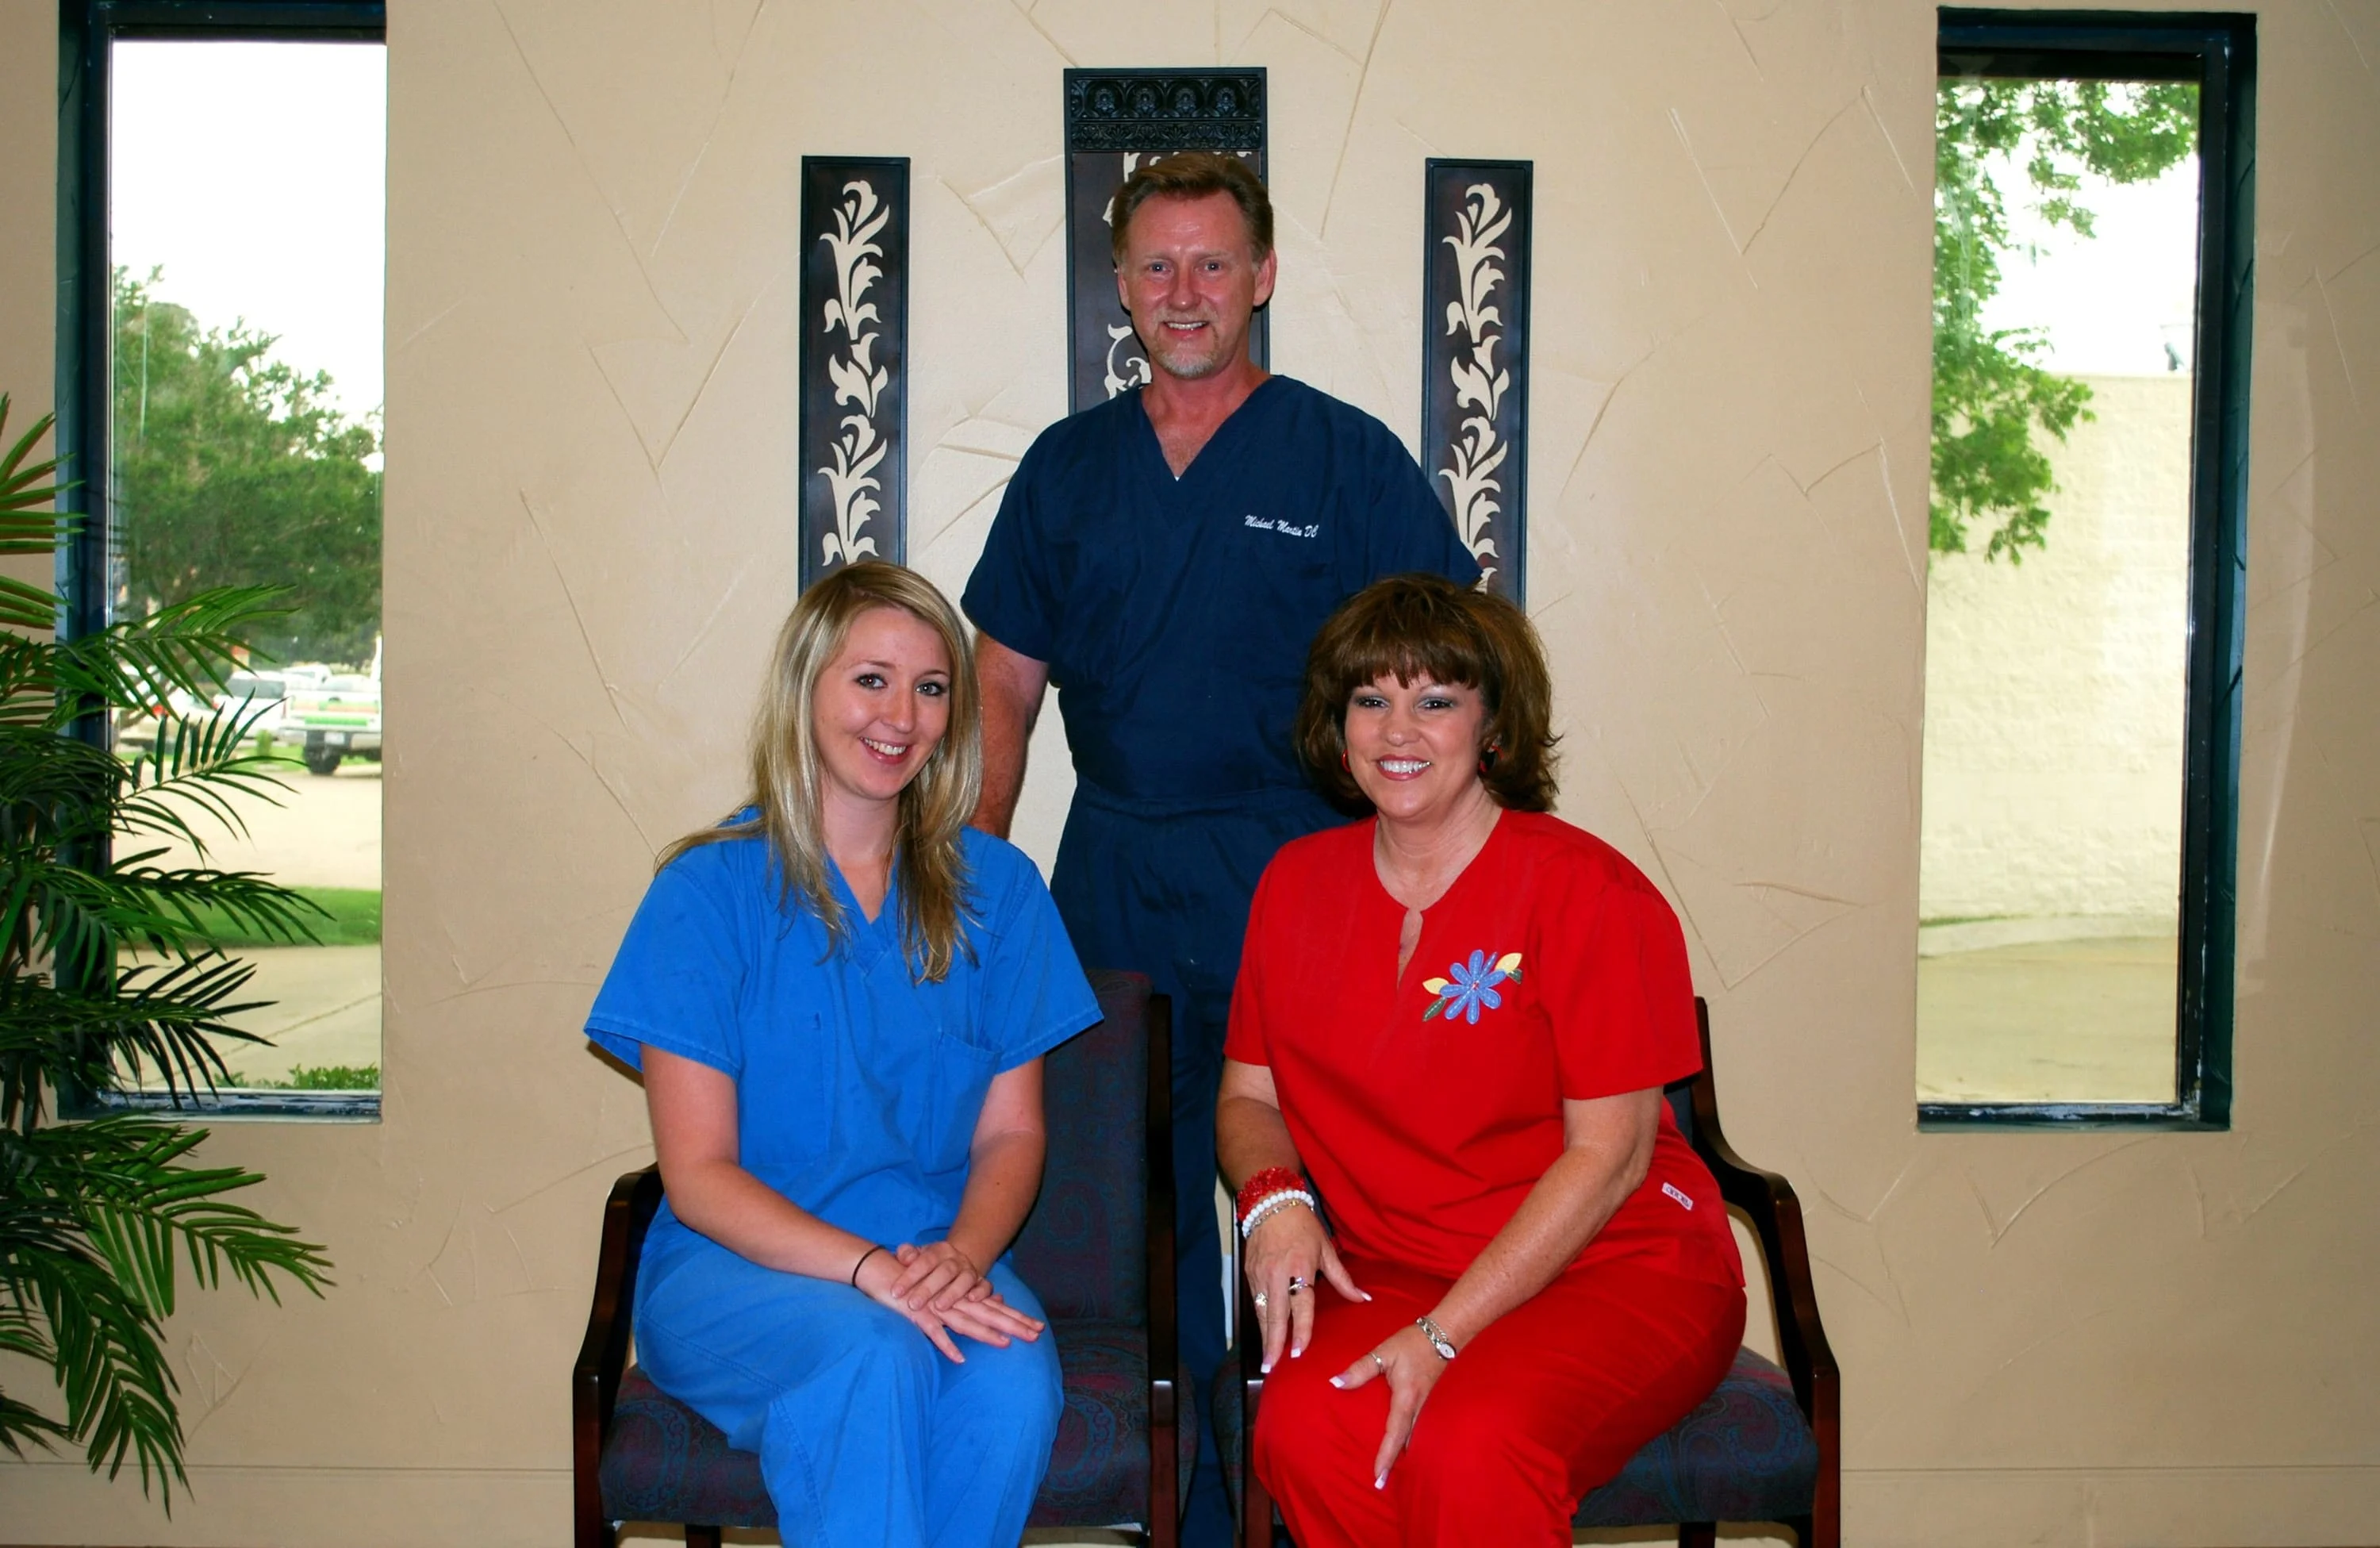 Dr. Martin and his two staff people that are unamed